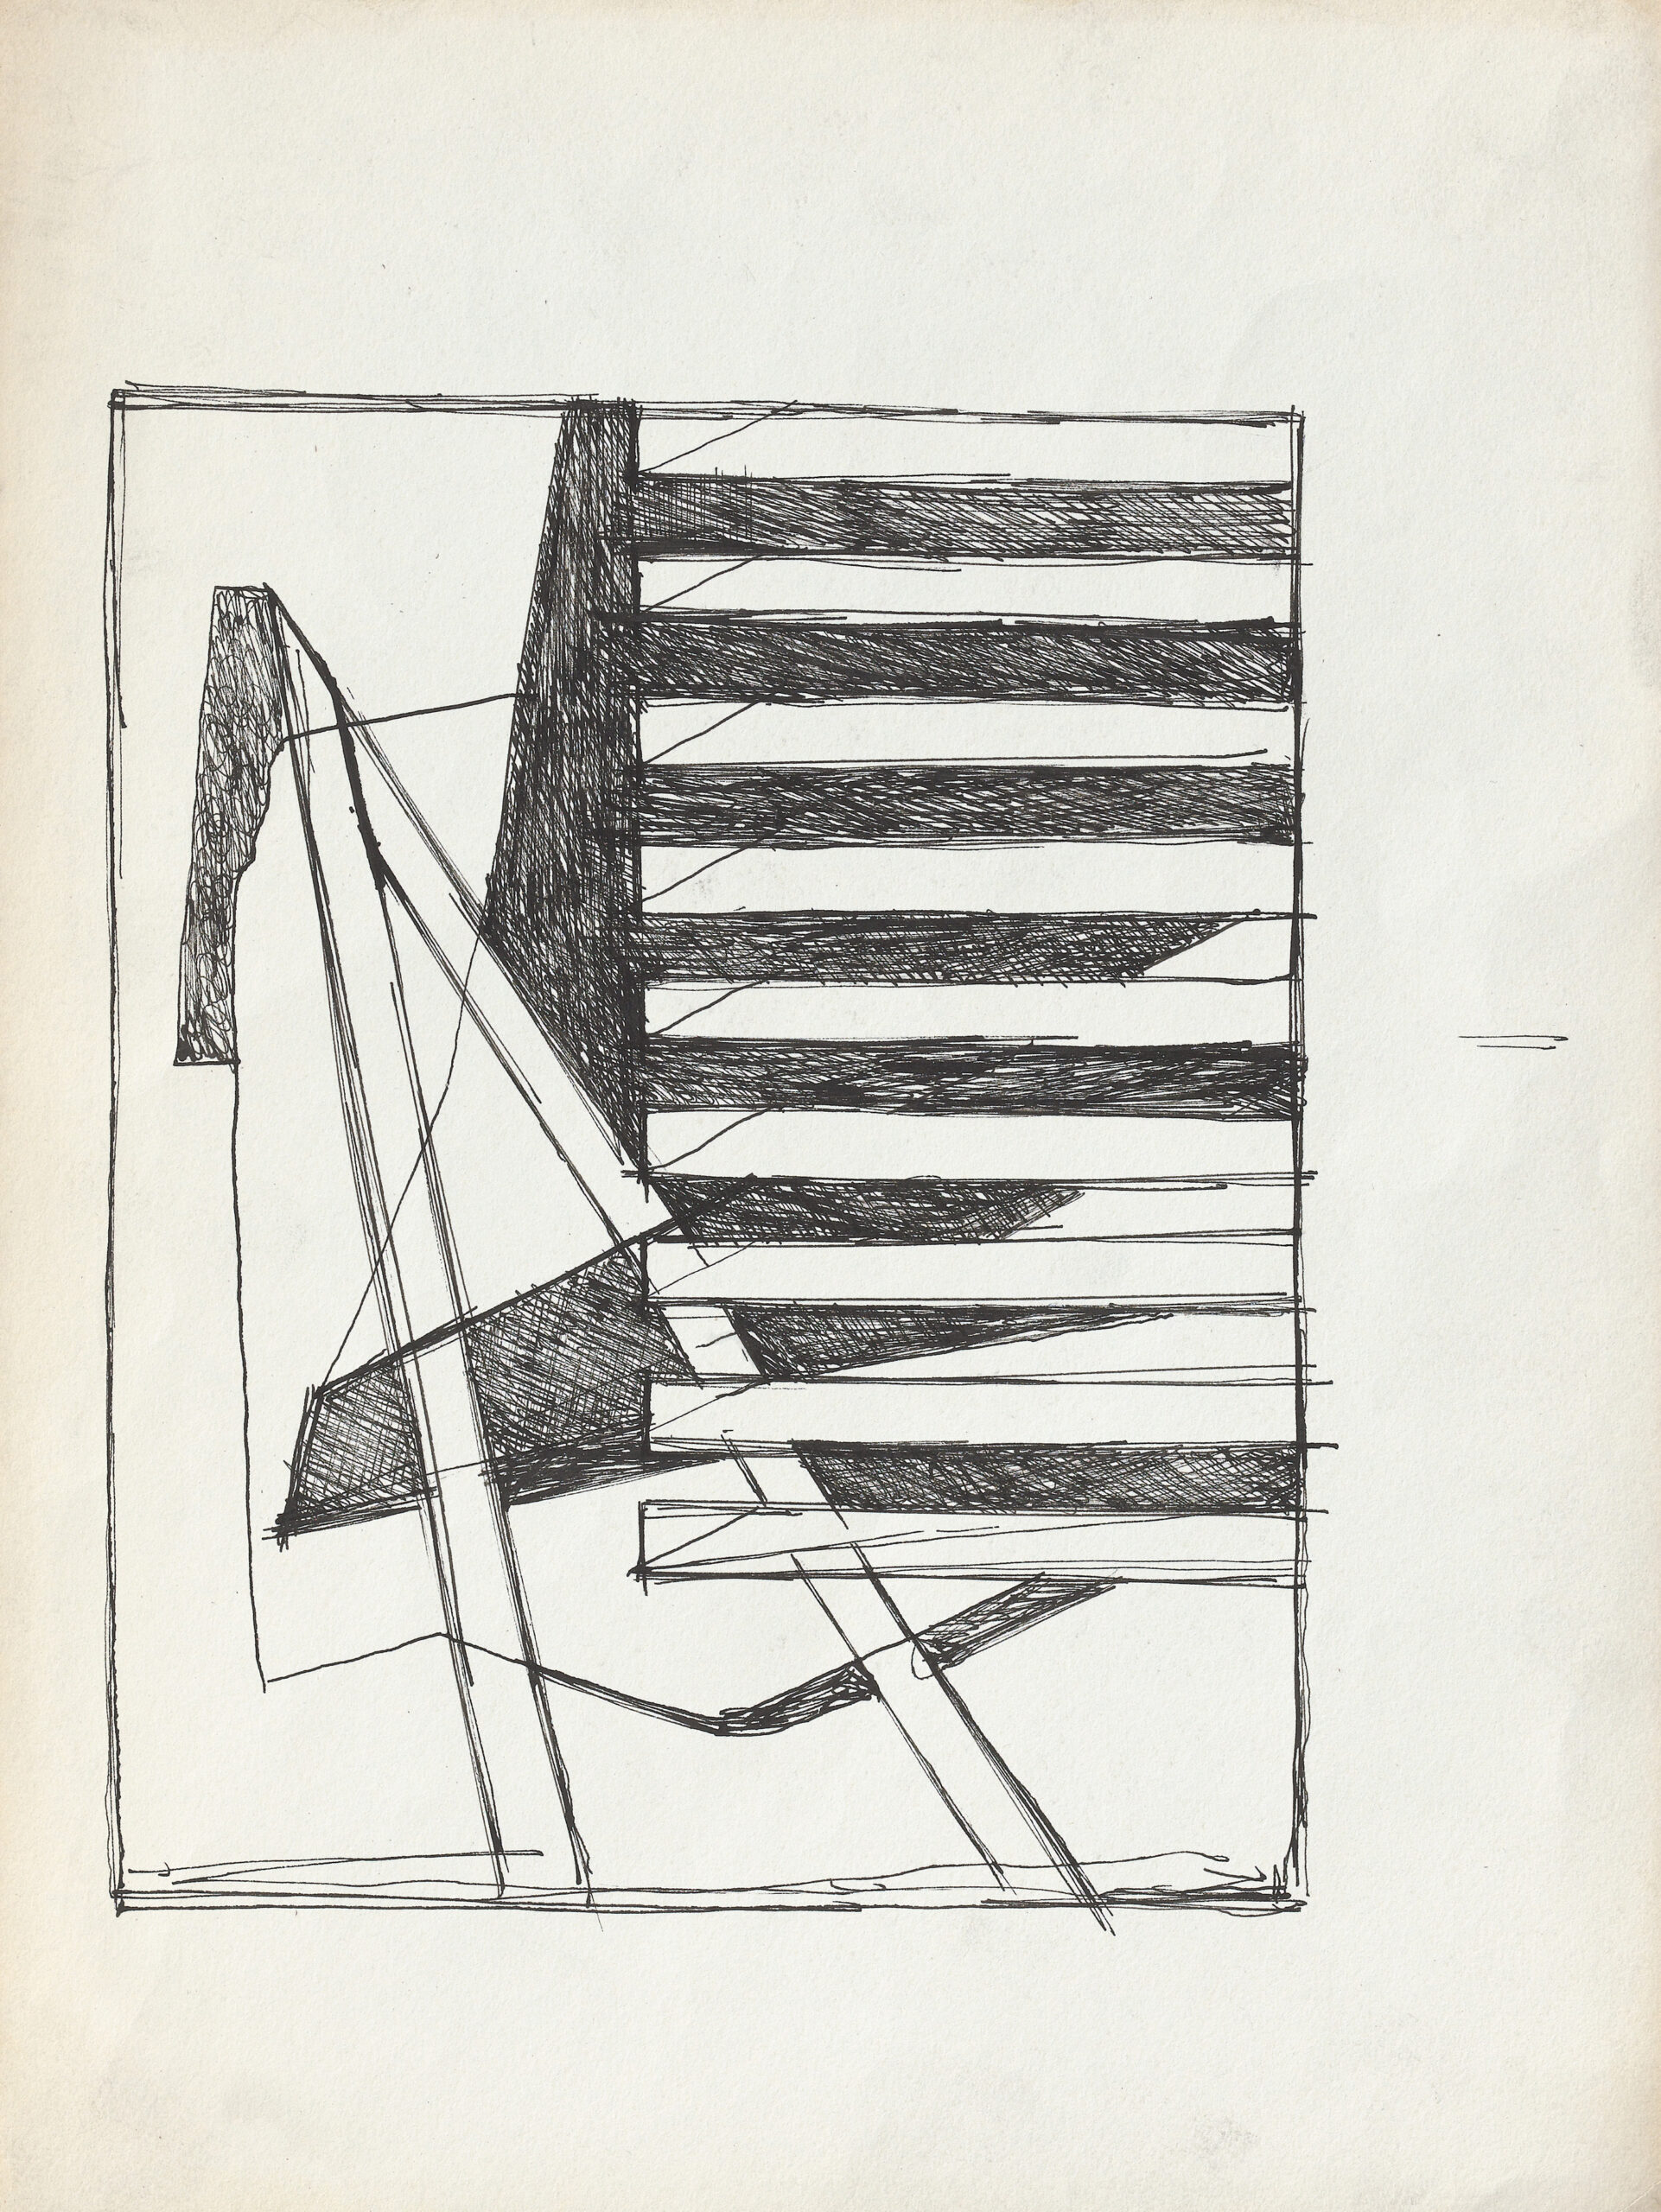 Abstracted ink study of an aircraft plant featuring a triangular shape set against horizontal stripes.